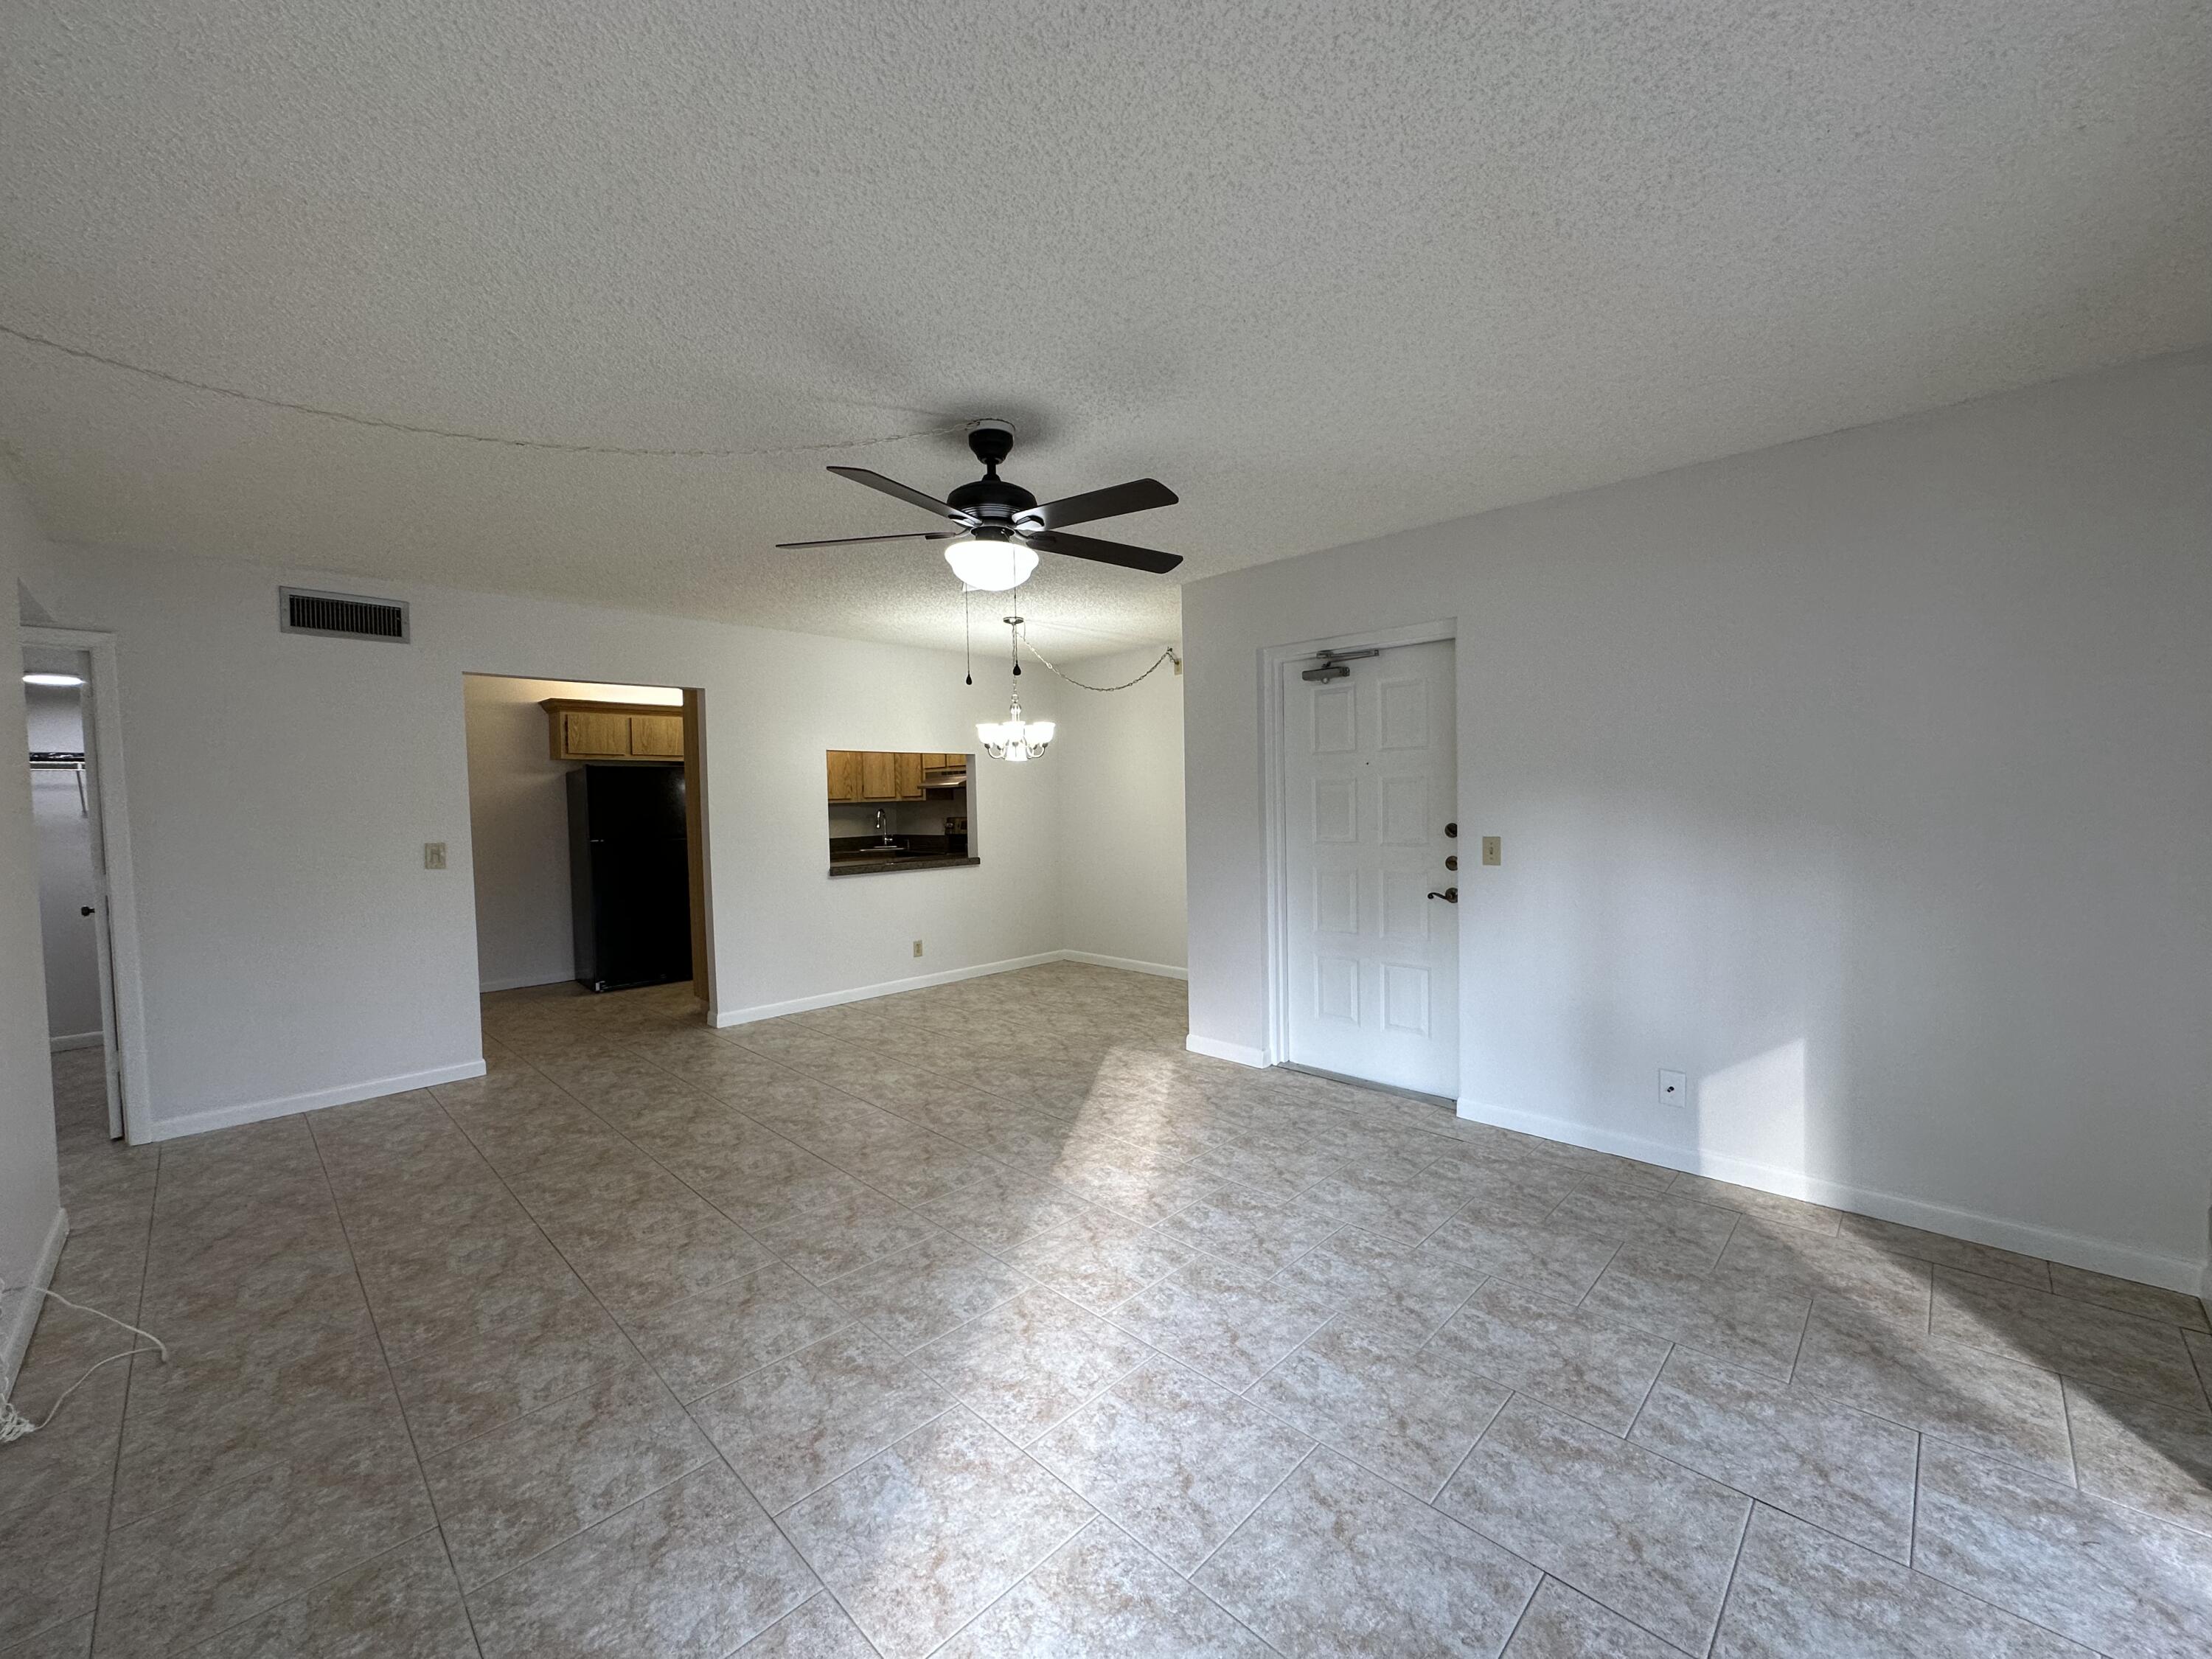 Property for Sale at 1101 Green Pine Boulevard A1, West Palm Beach, Palm Beach County, Florida - Bedrooms: 2 
Bathrooms: 2  - $240,000